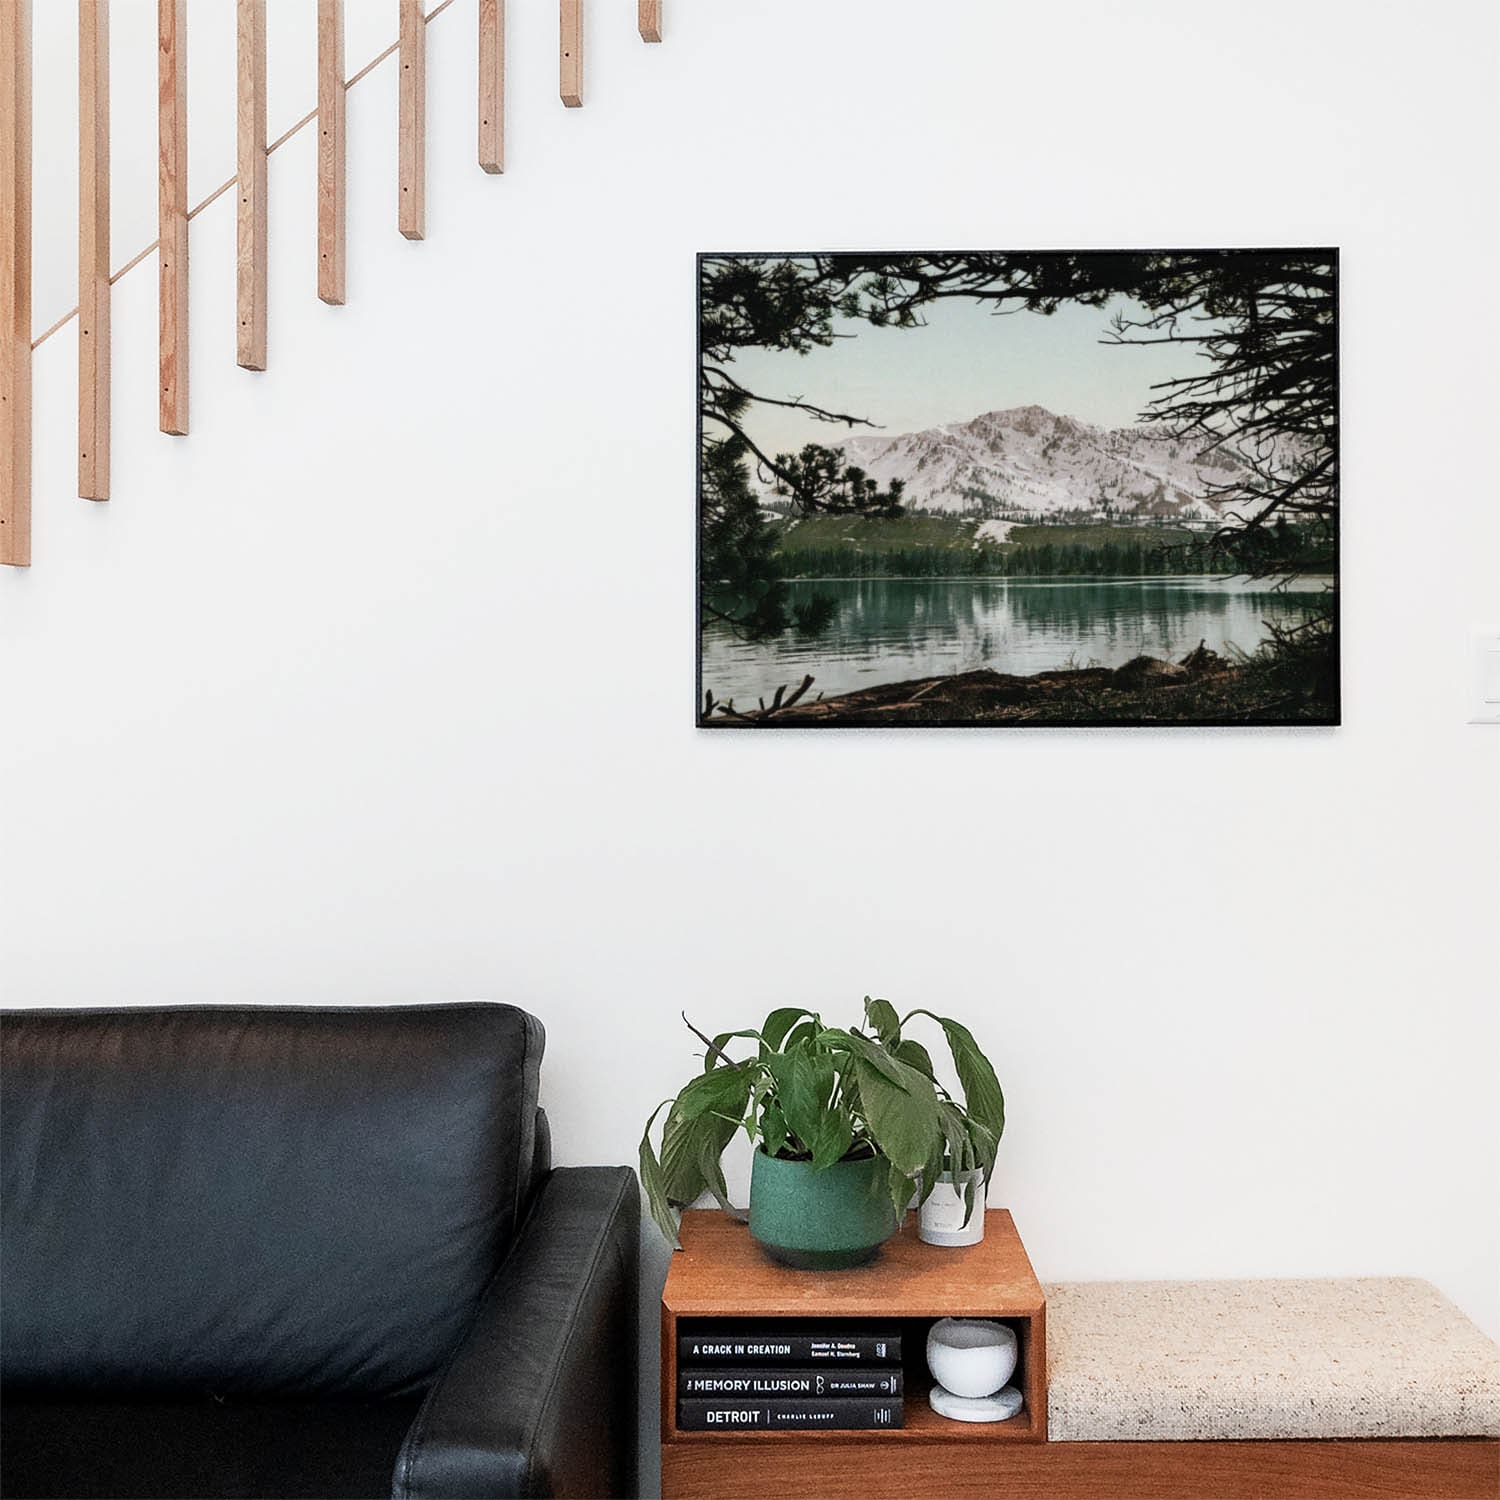 Living space with a black leather couch and table with a plant and books below a staircase featuring a framed picture of Lake in the Wilderness